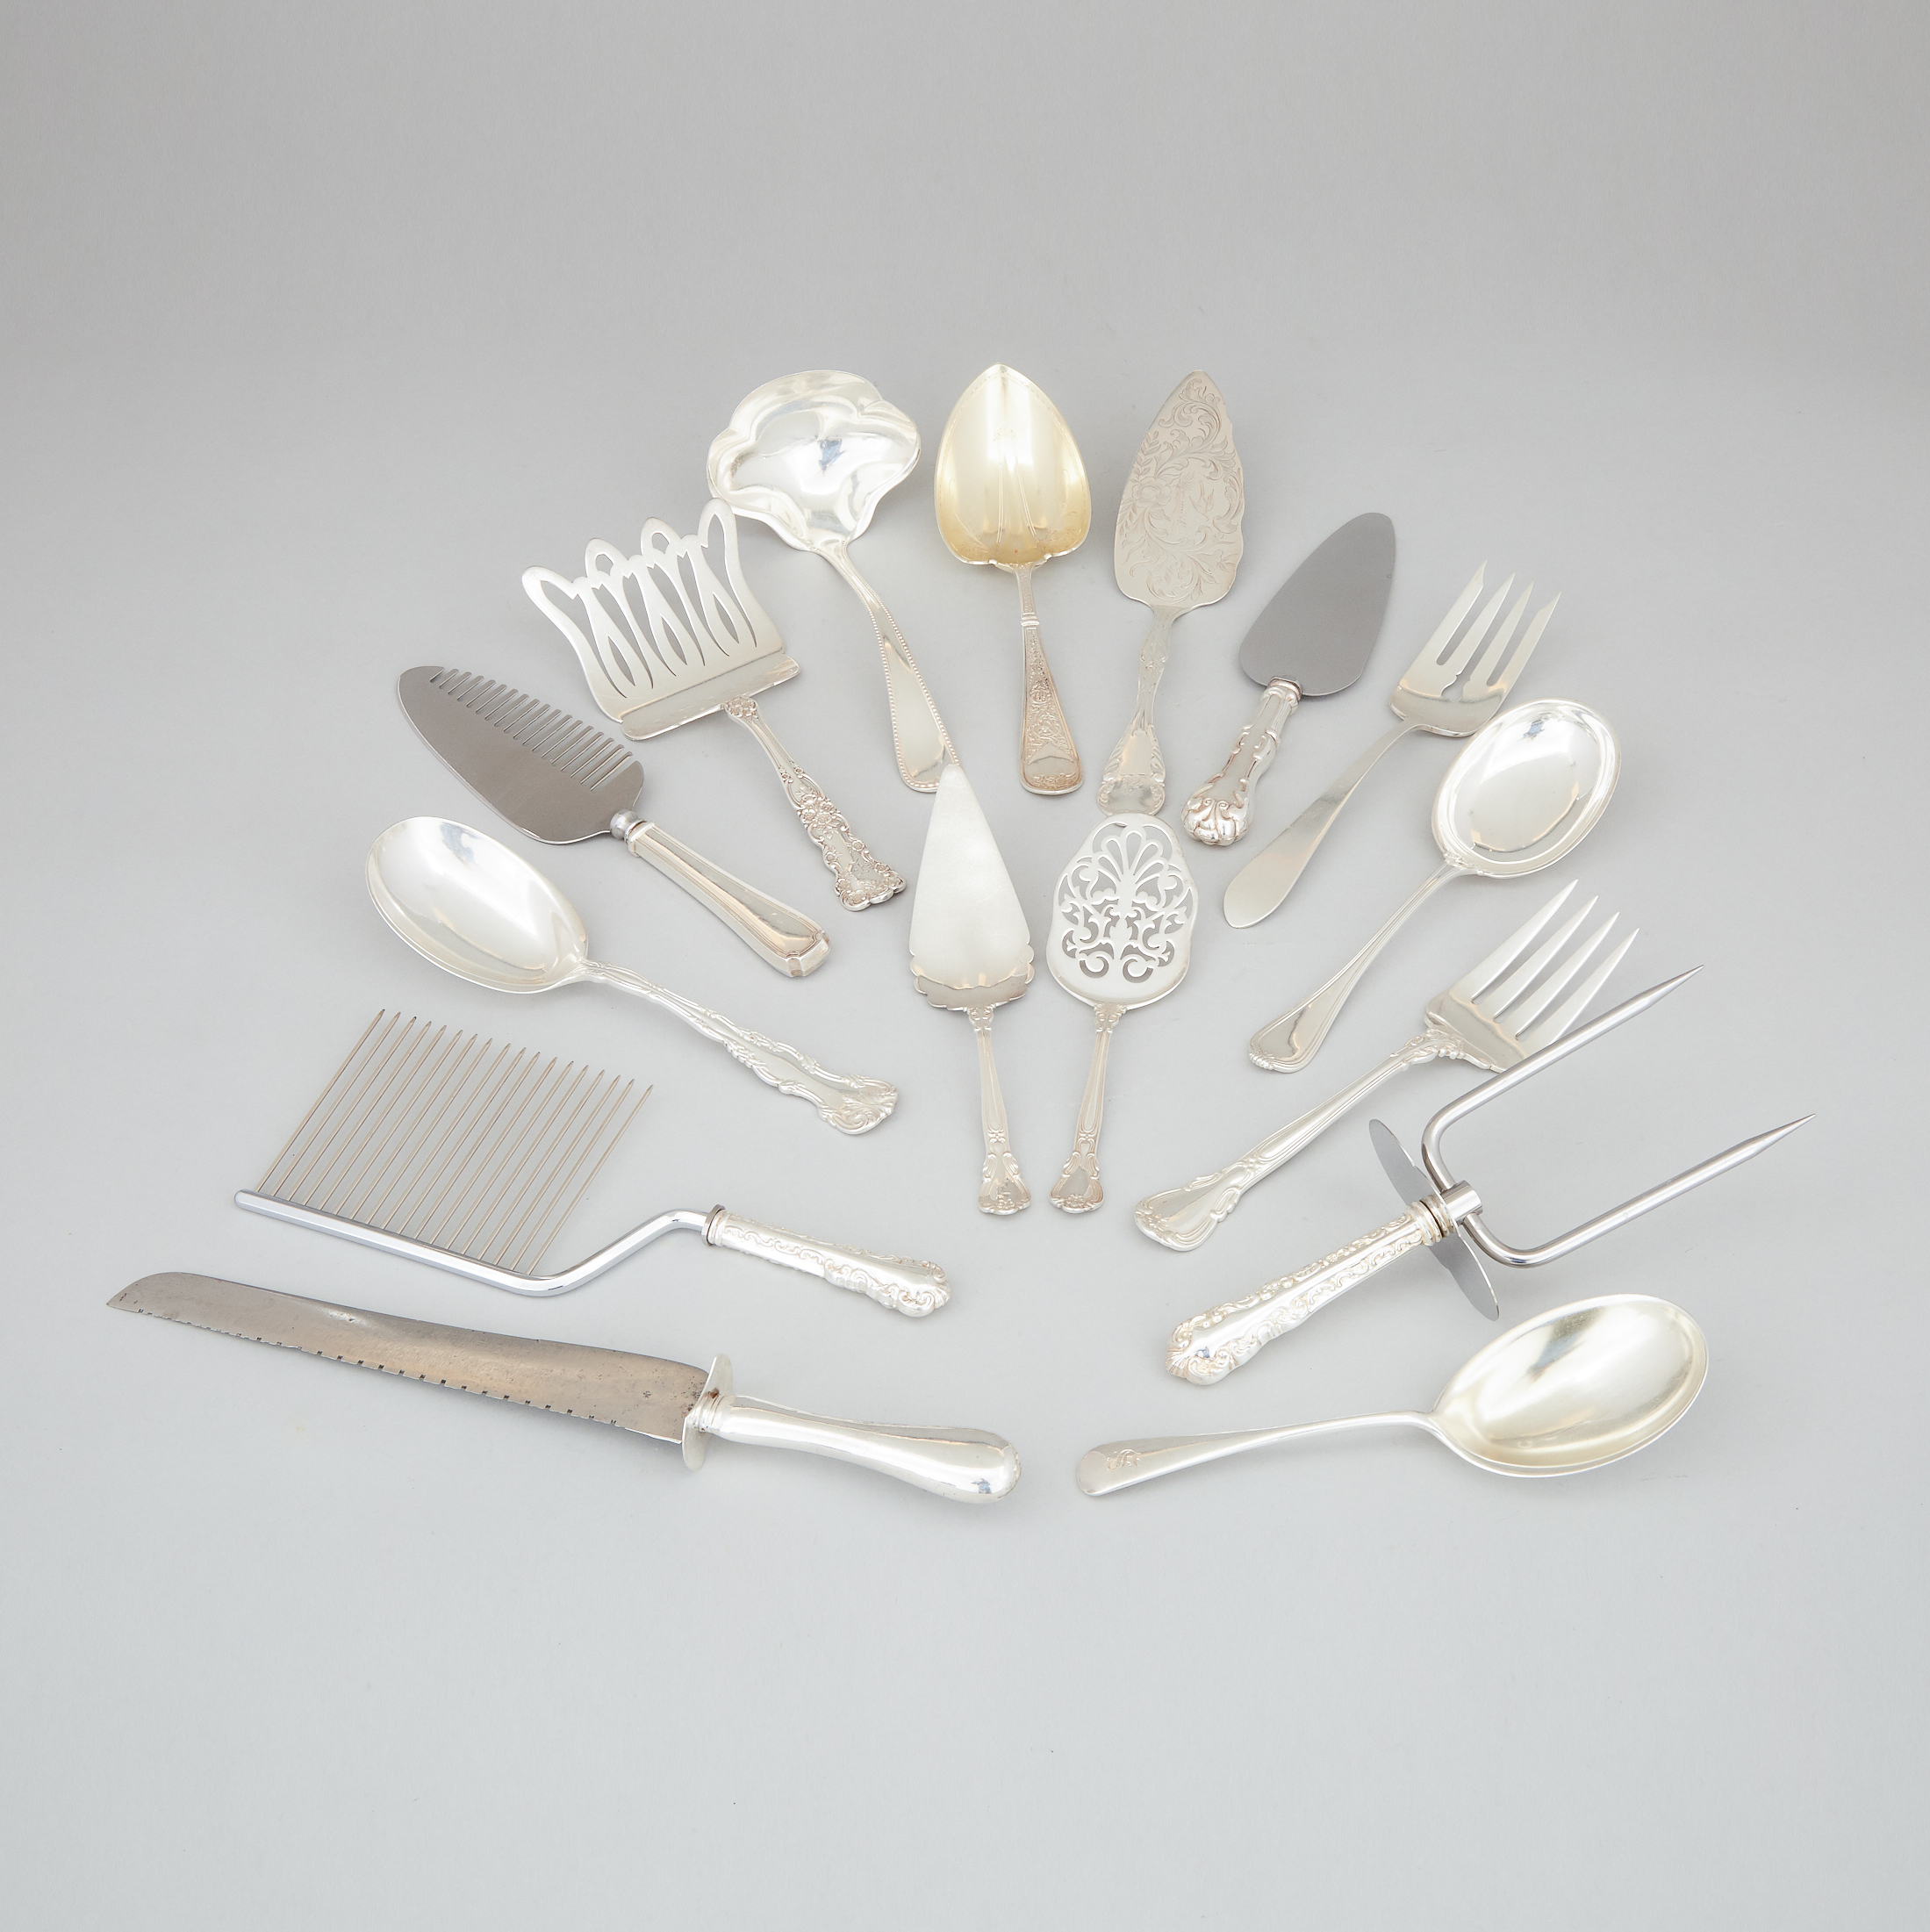 Group of North American Silver Flatware, late 19th/20th century